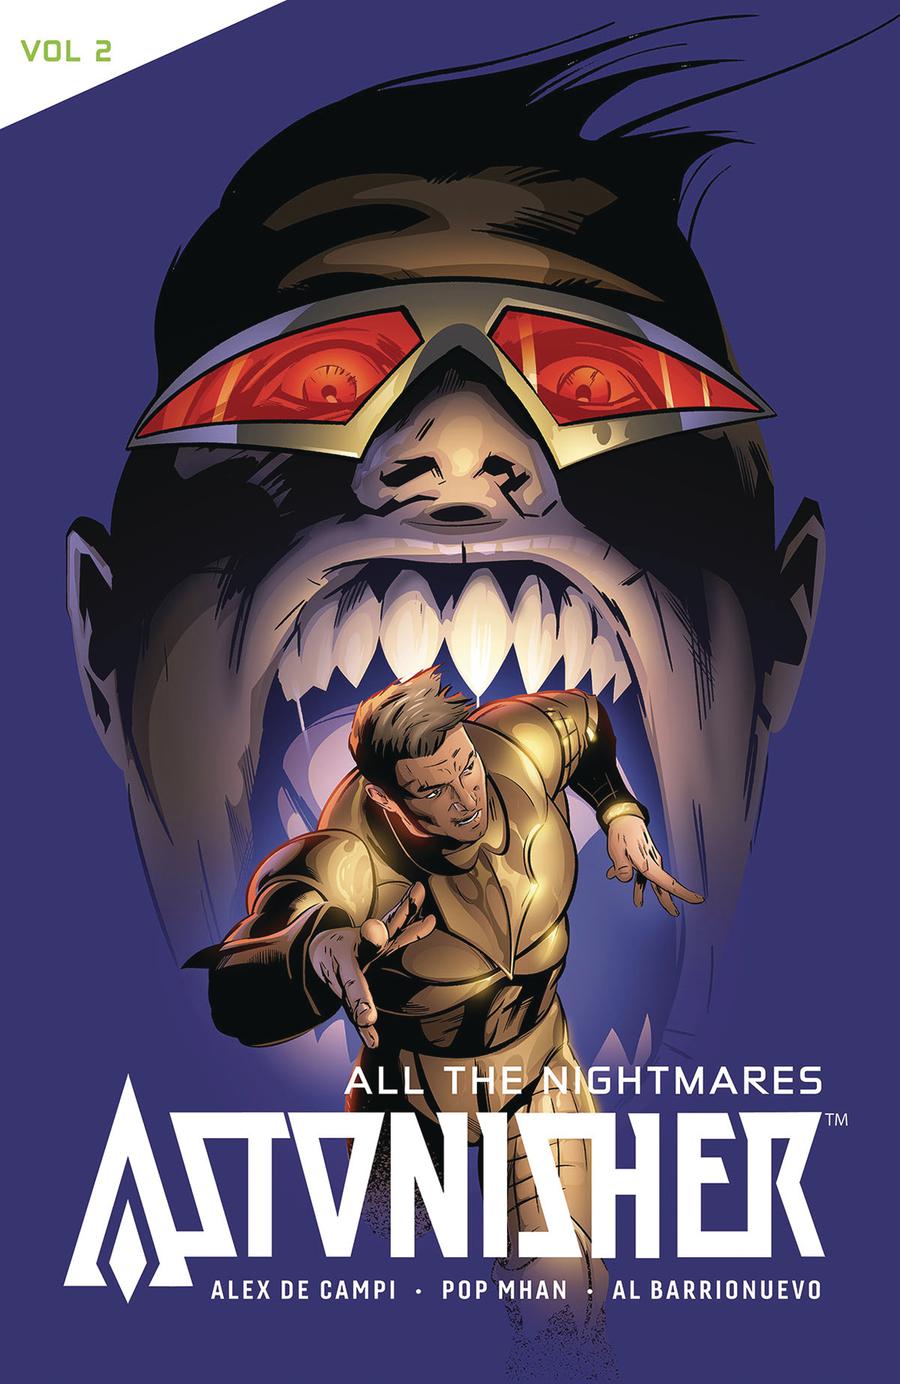 Catalyst Prime Astonisher Vol 2 All The Nightmares TP